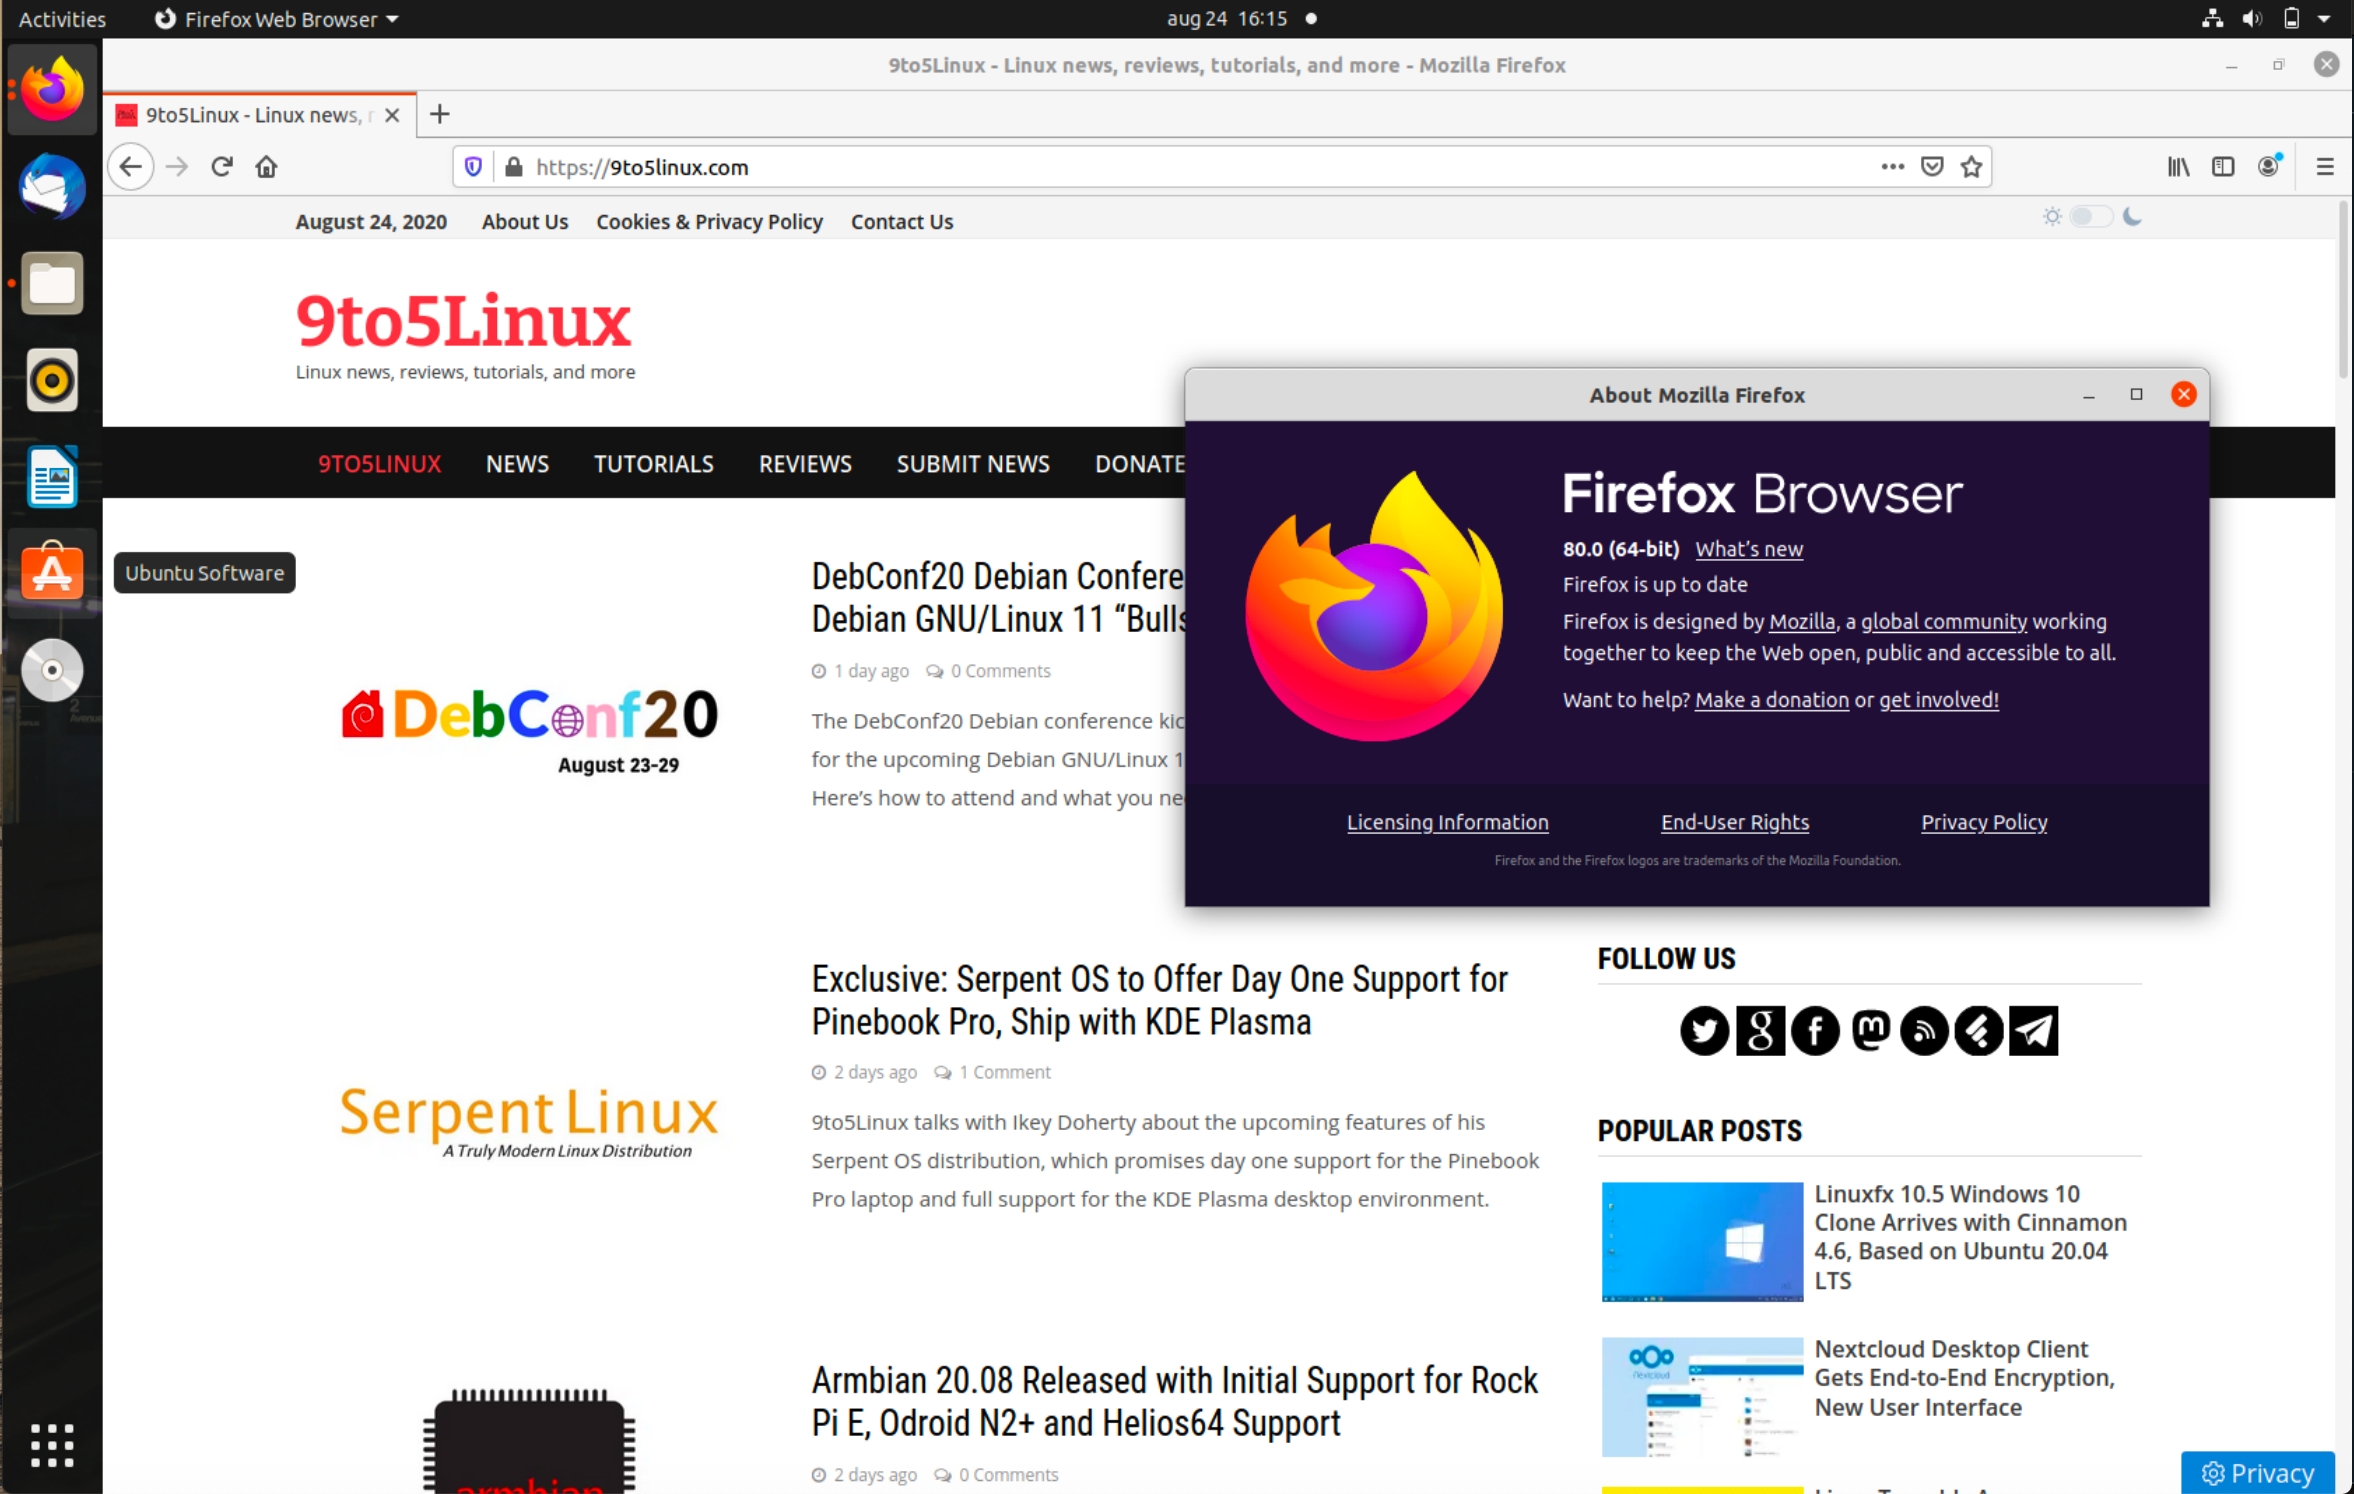 Mozilla Firefox 80 Is Now Available for Download with VAAPI Acceleration on X11